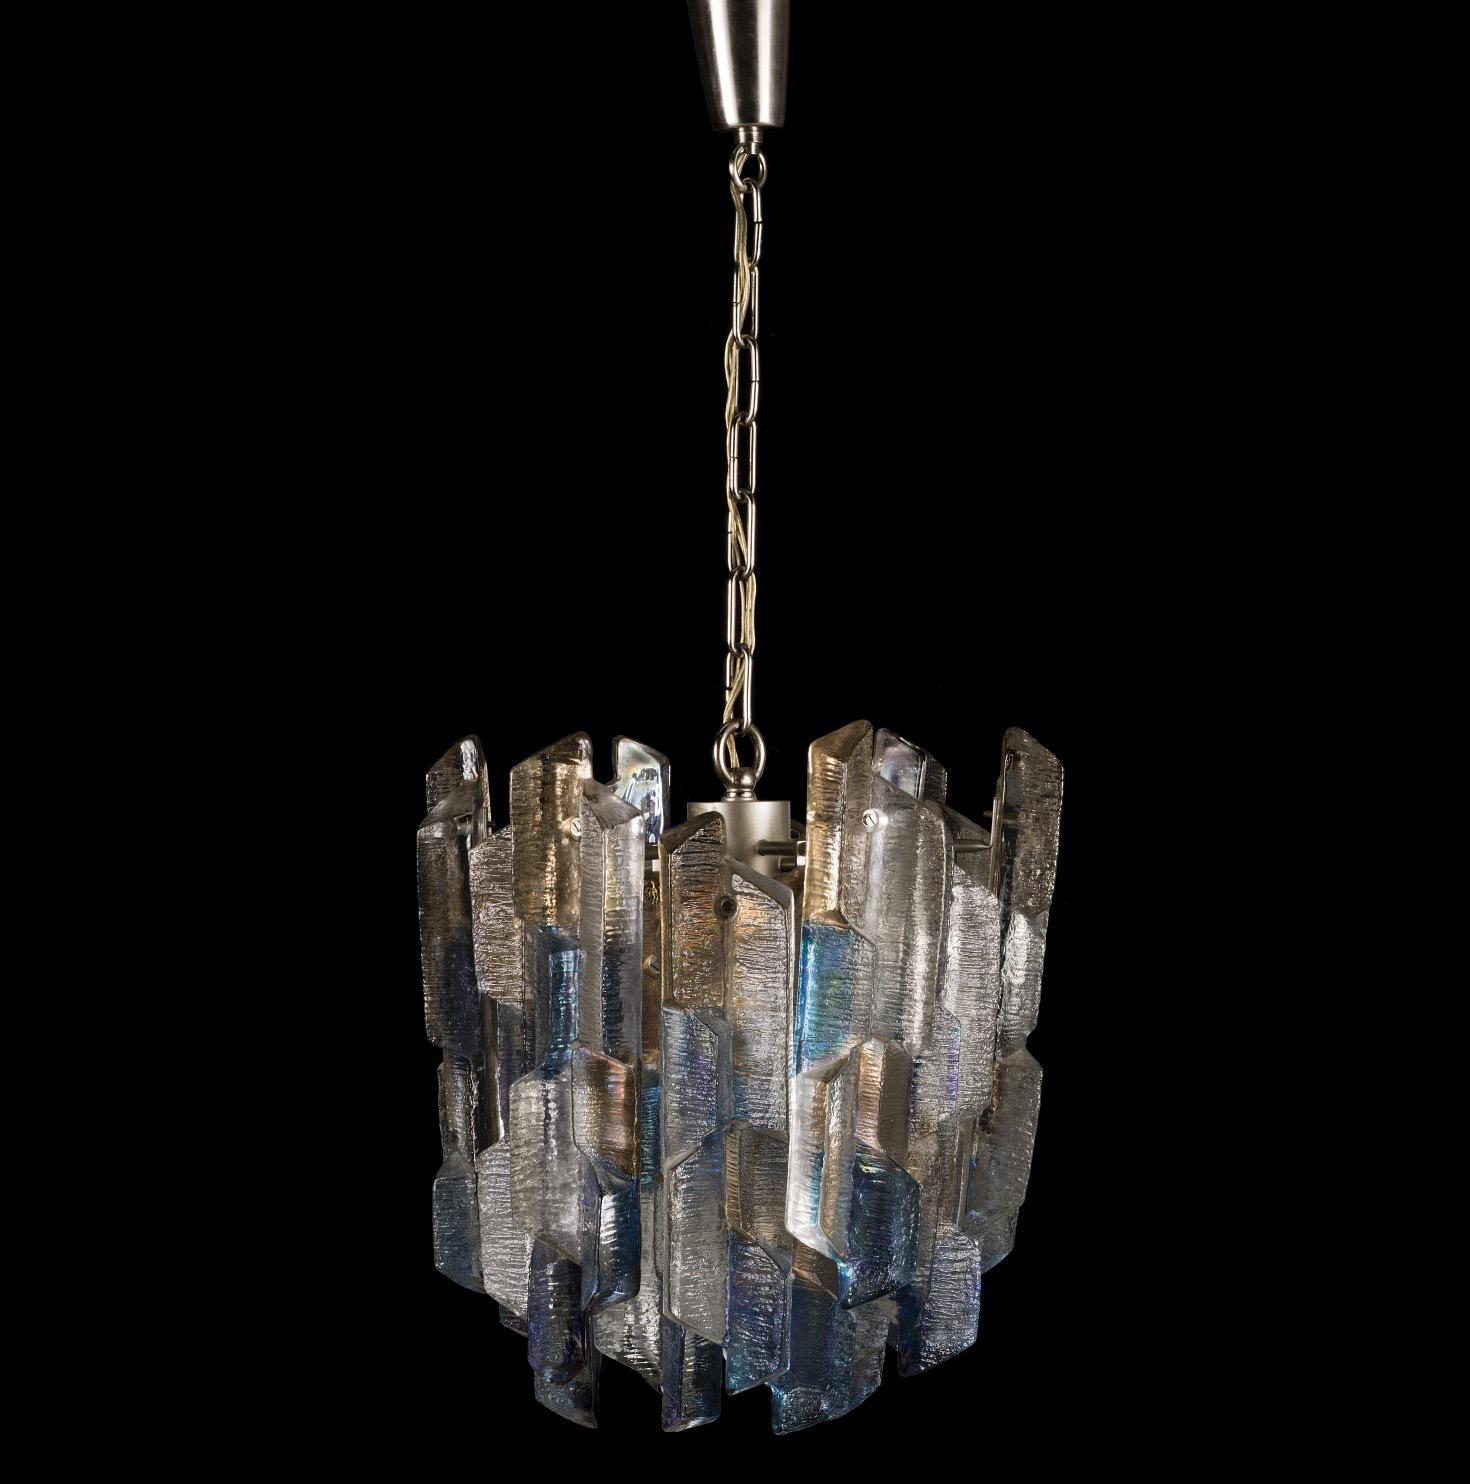 Ultra swanky Kalmar chandelier, Vienna, Austria, 1970.
Metal frame with numerous frosted thick ice looking glass elements that has blue and yellow tint to them, This is by far the most rare production Kalmar ever produced it is in excellent